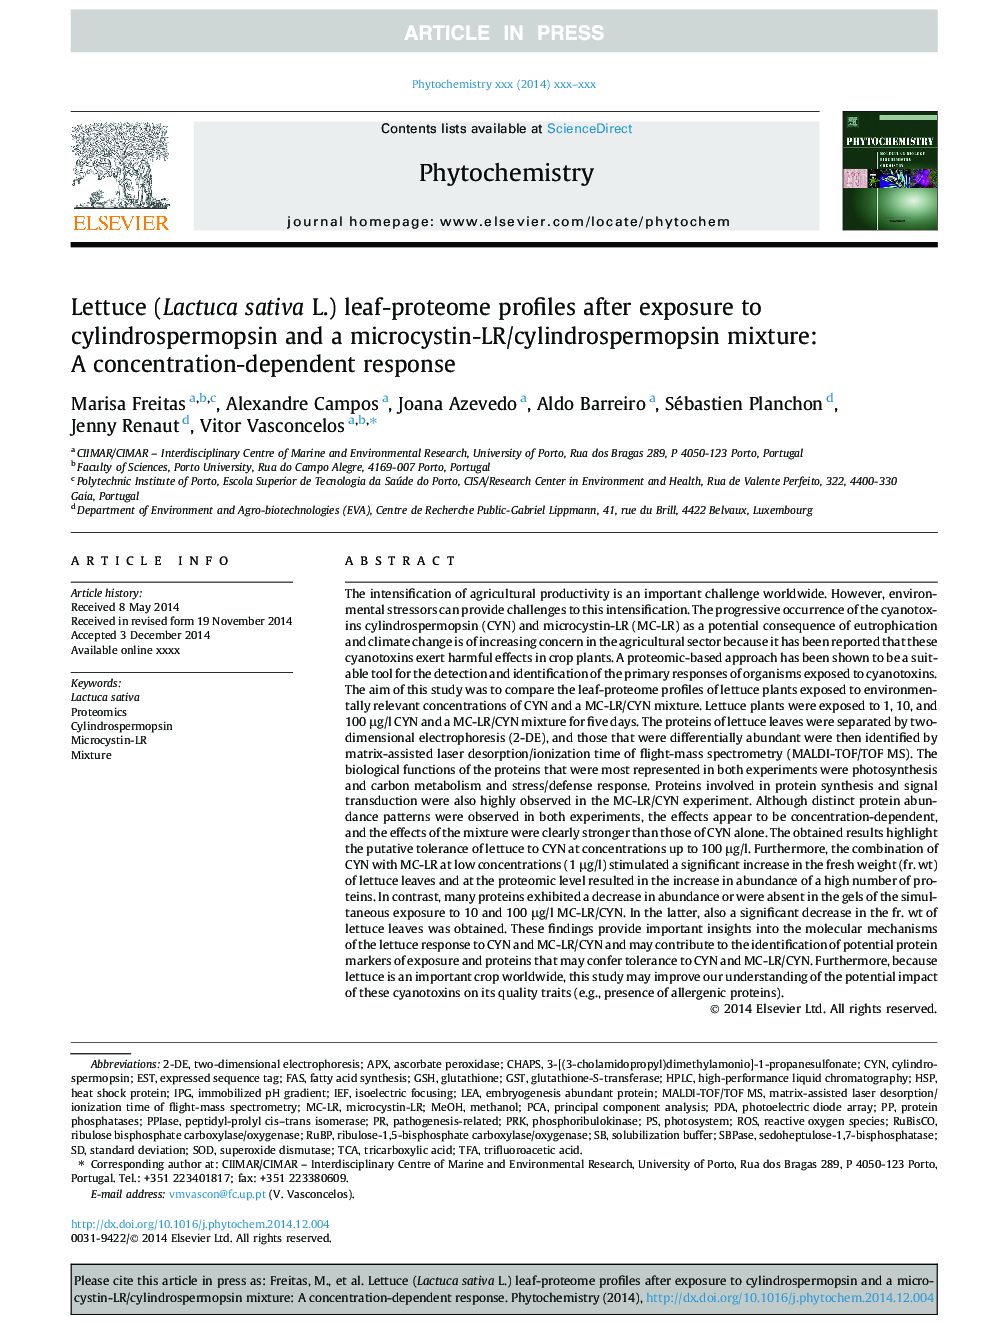 Lettuce (Lactuca sativa L.) leaf-proteome profiles after exposure to cylindrospermopsin and a microcystin-LR/cylindrospermopsin mixture: A concentration-dependent response